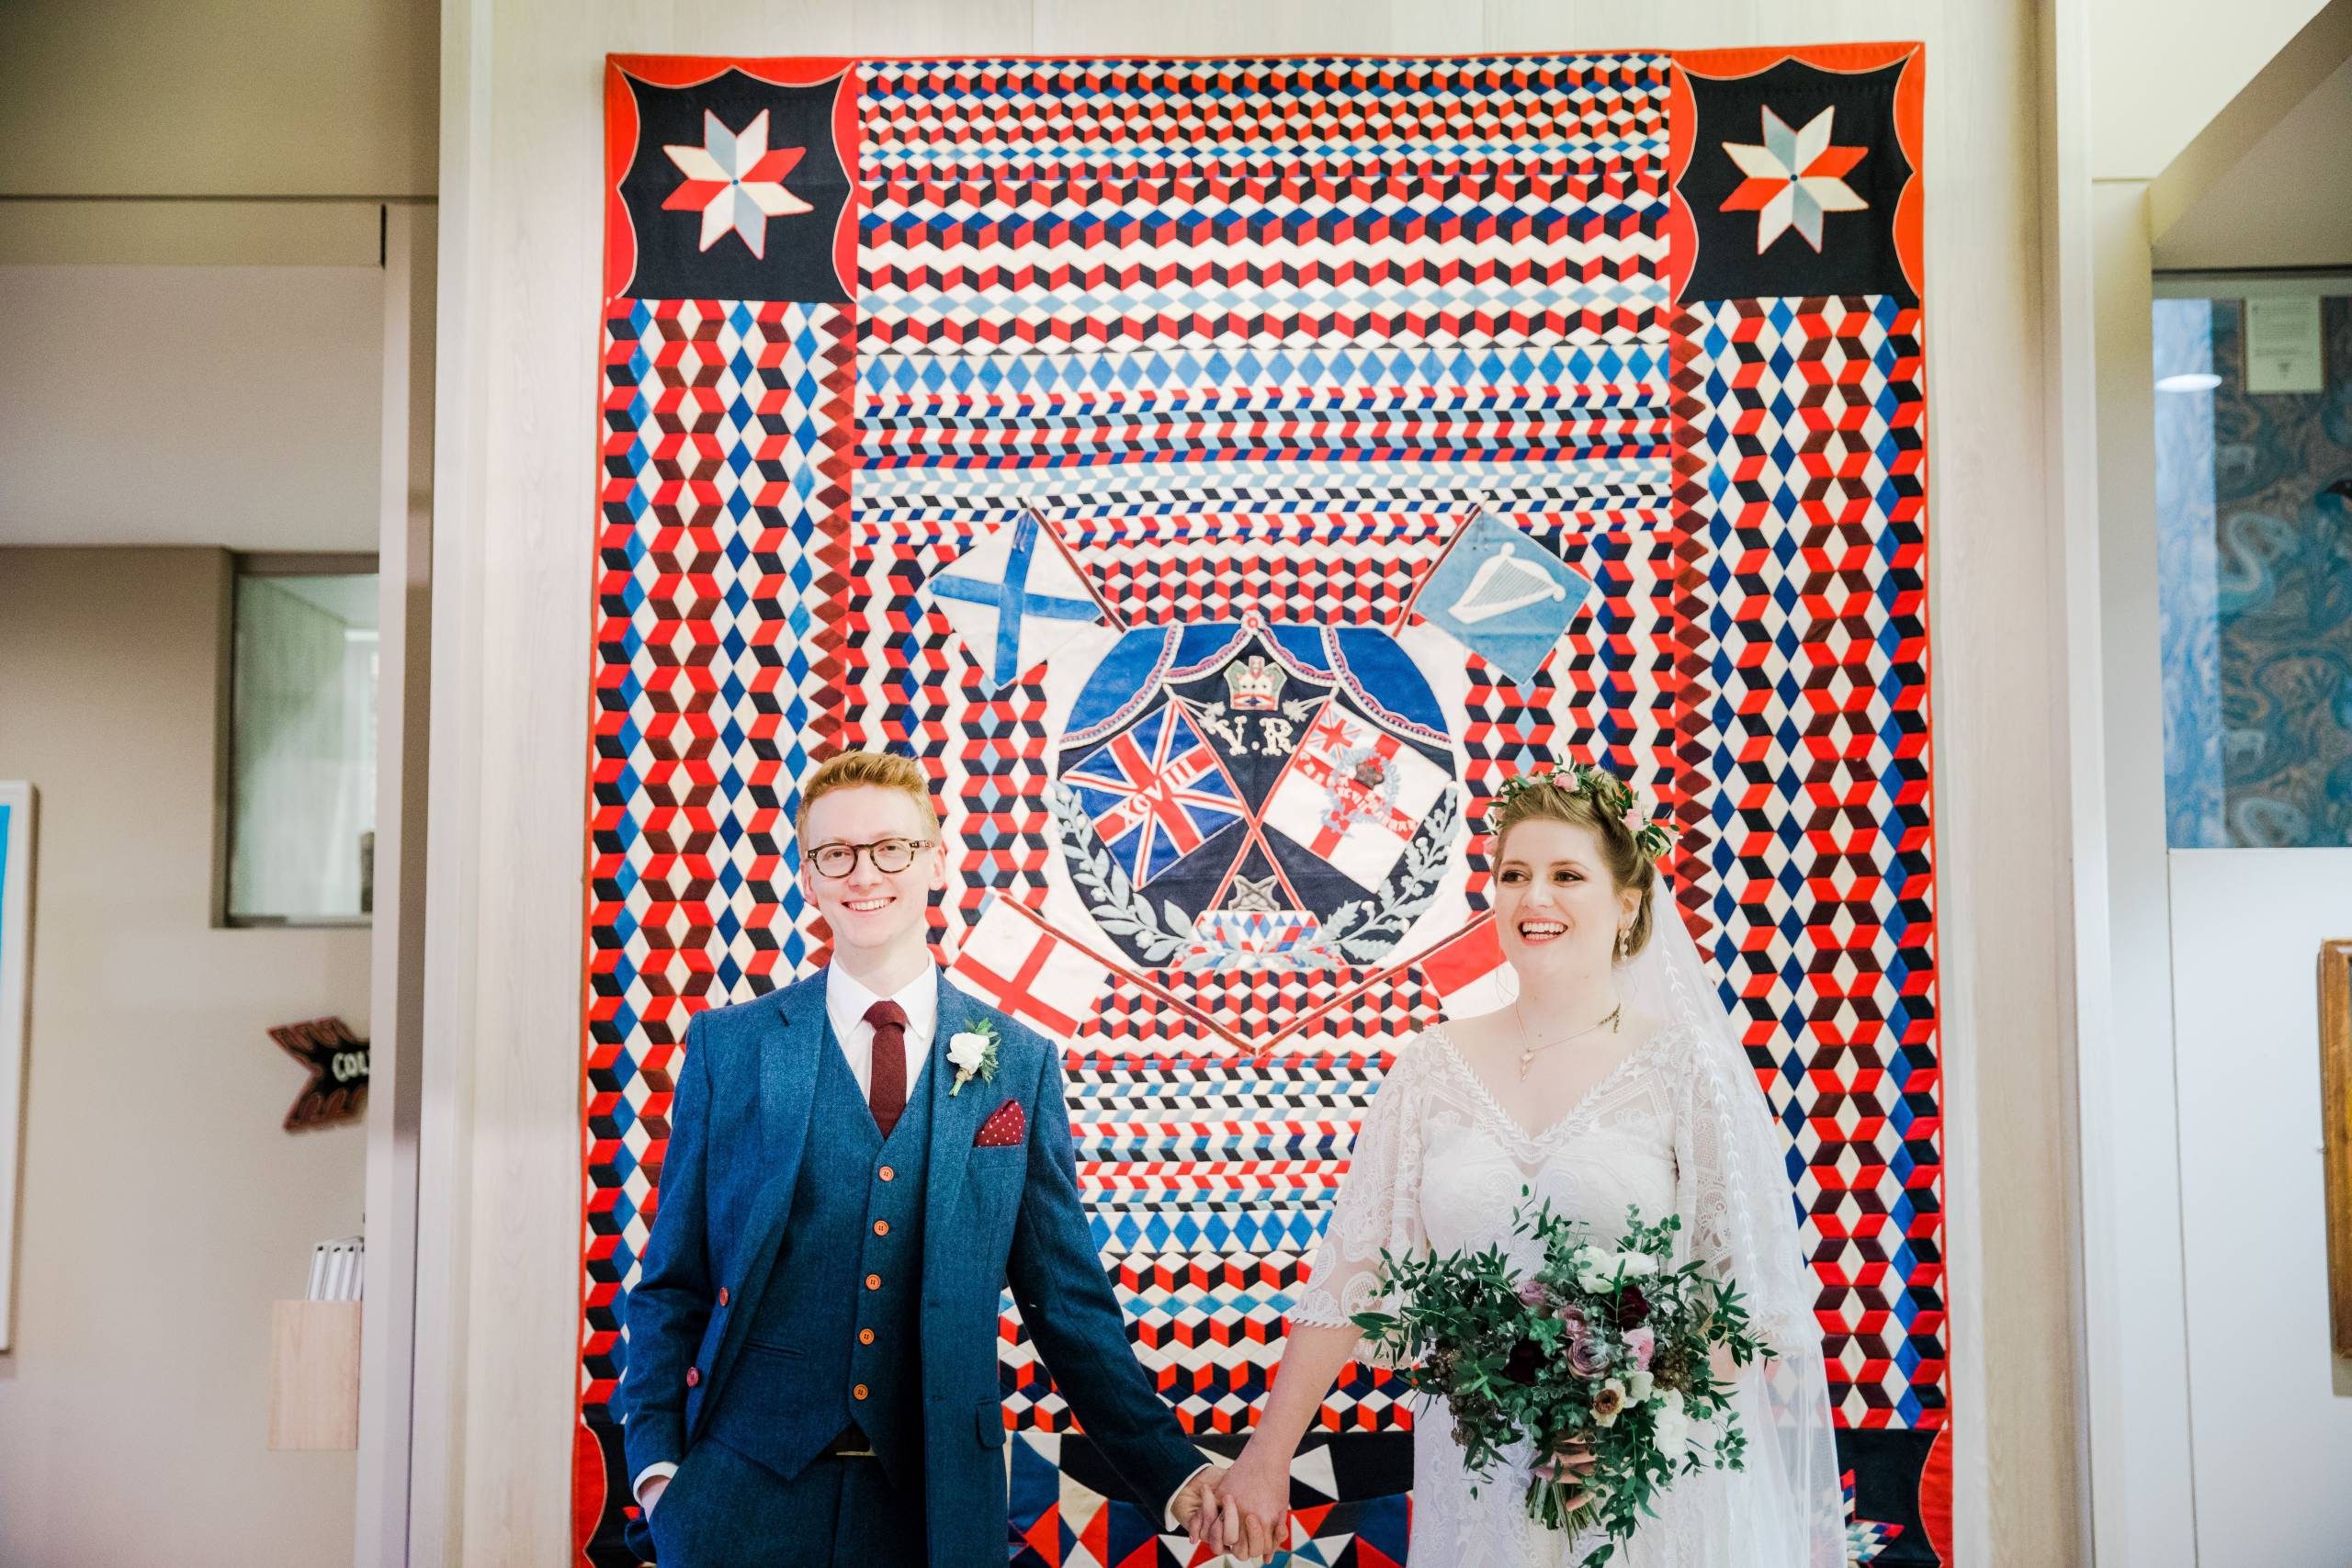 A bride and groom stand in front of a large red, white and blue military quilt